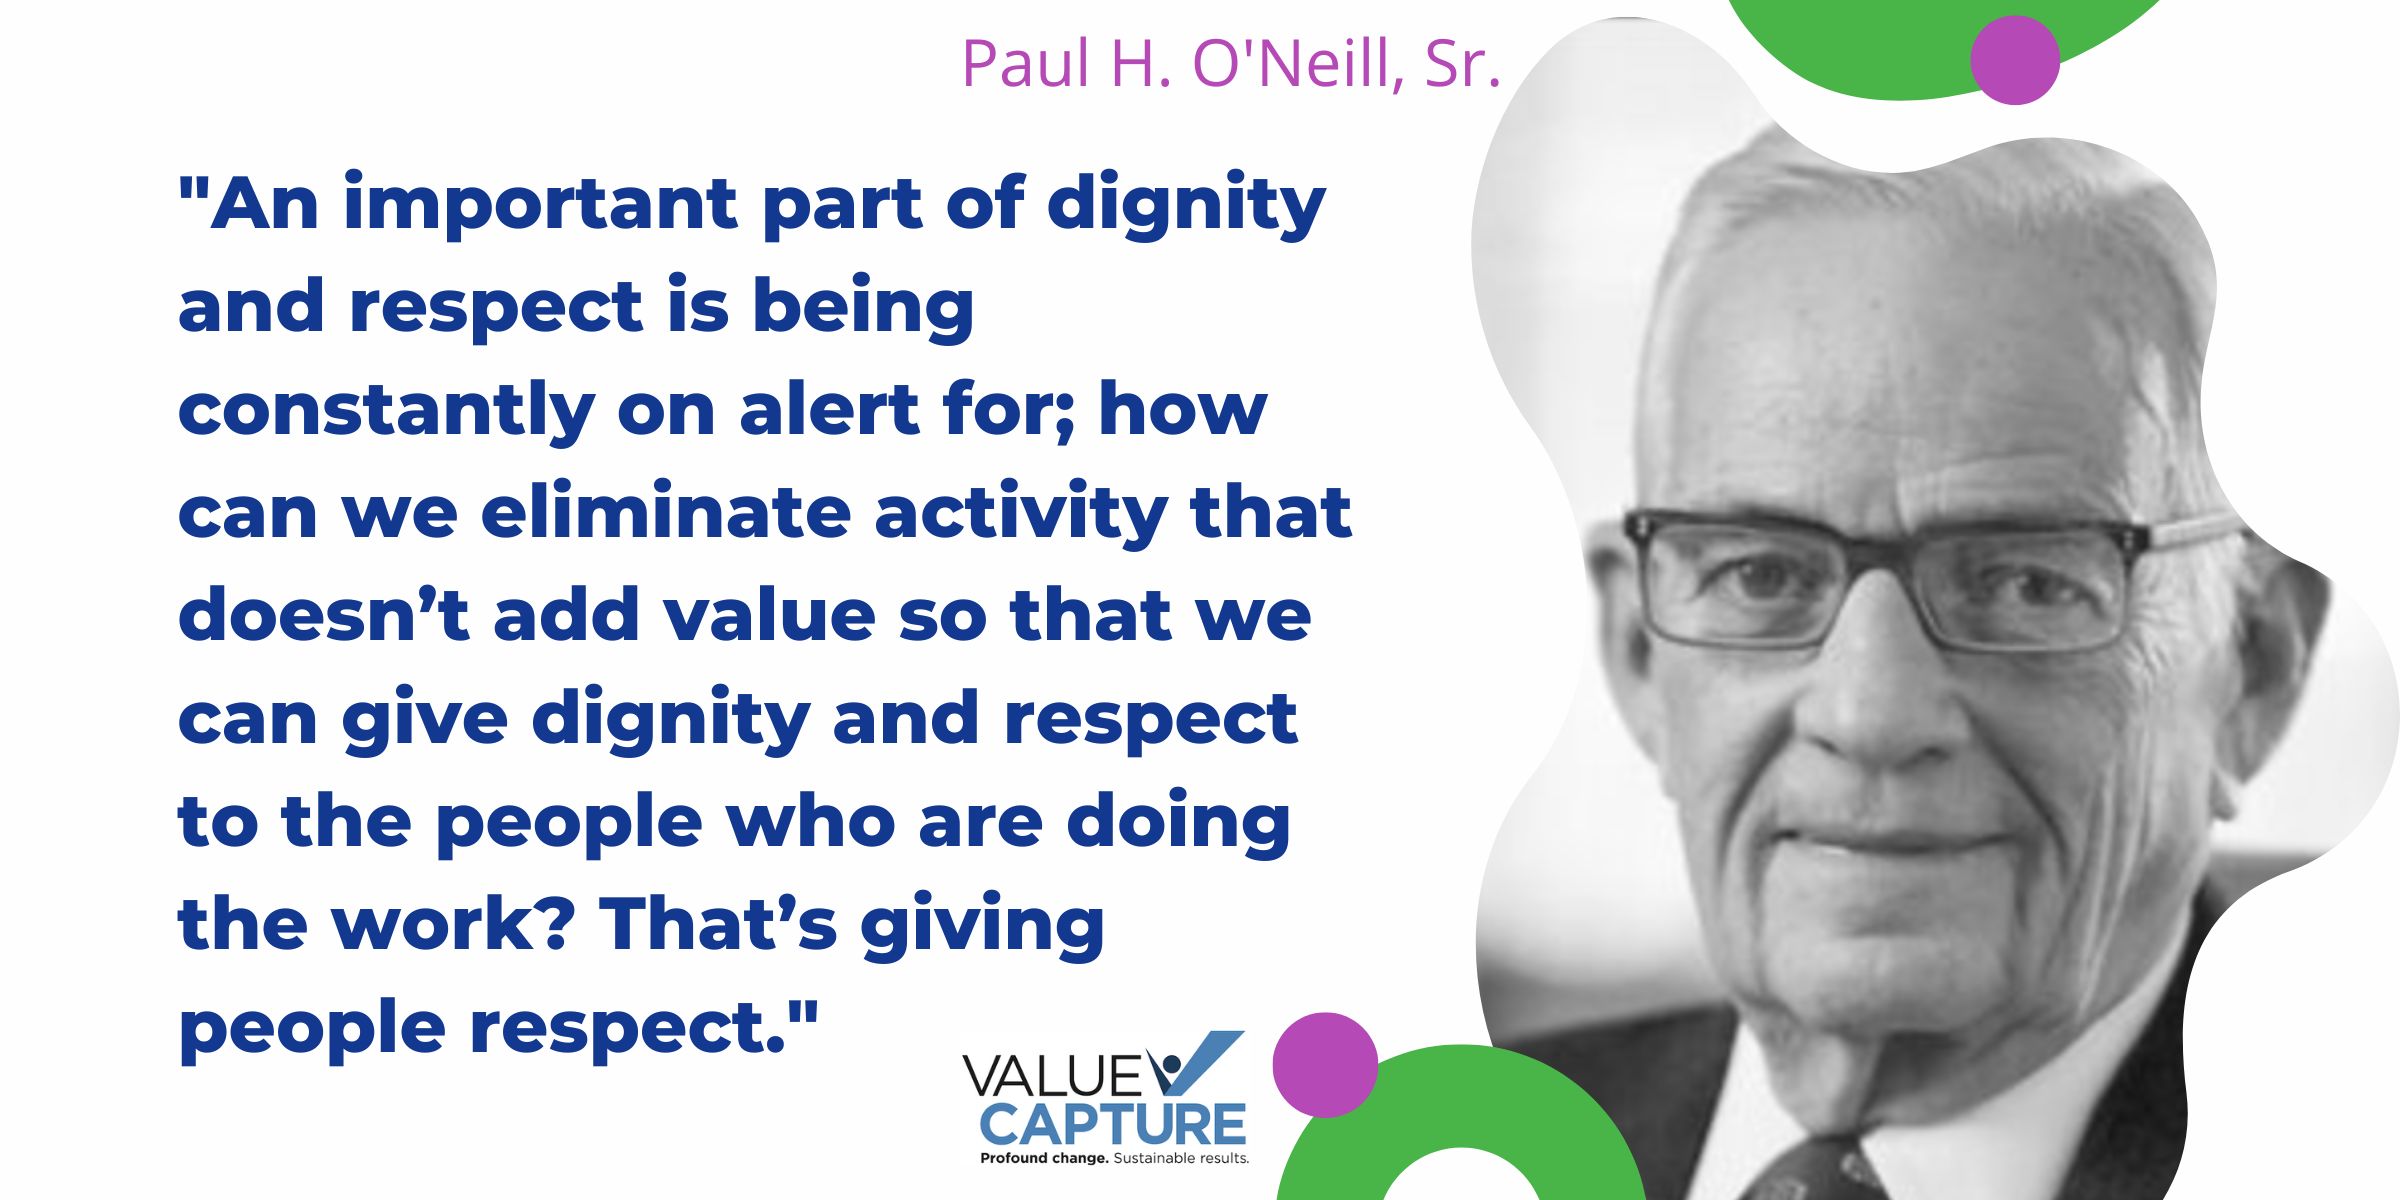 "An important part of dignity and respect is being constantly on alert for; how can we eliminate activity that doesn’t add value so that we can give dignity and respect to the people who are doing the work? That’s giving people respect." paul o'neill 